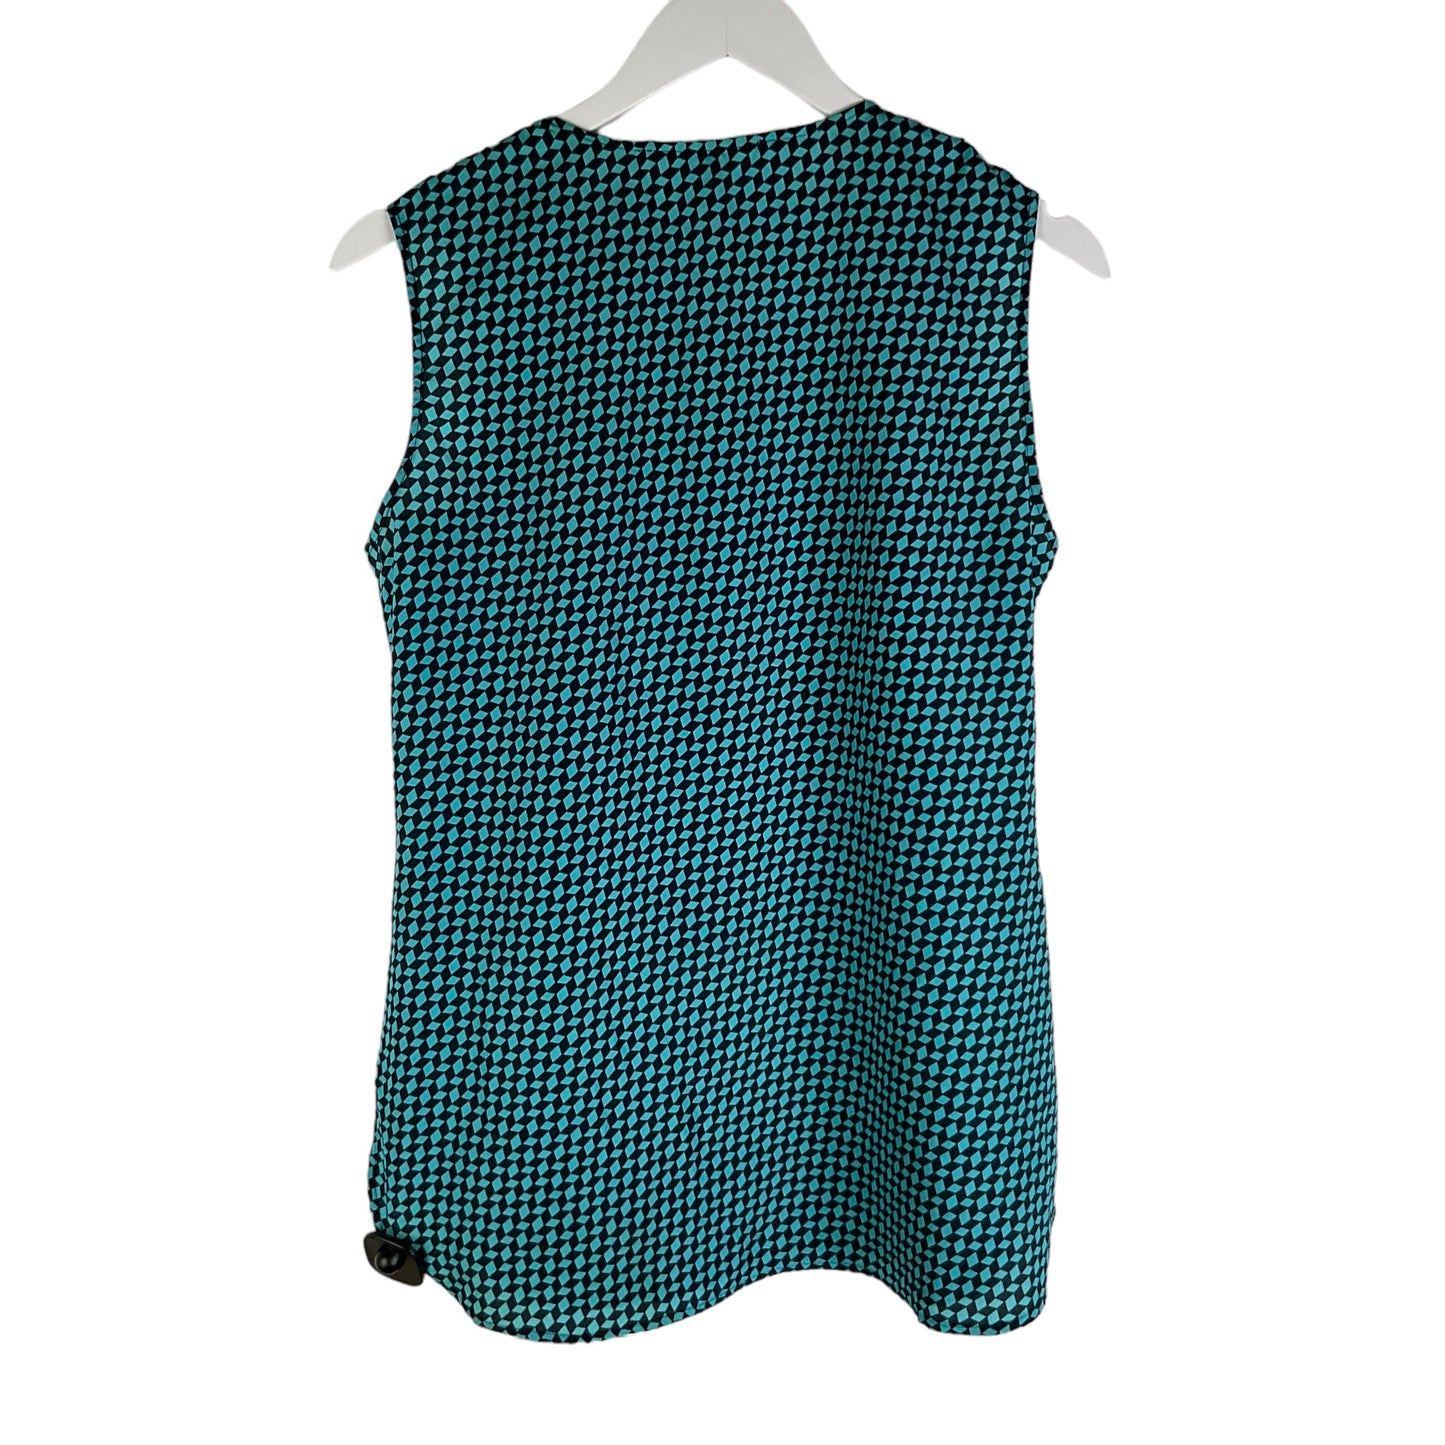 Top Sleeveless By Michael Kors  Size: 6